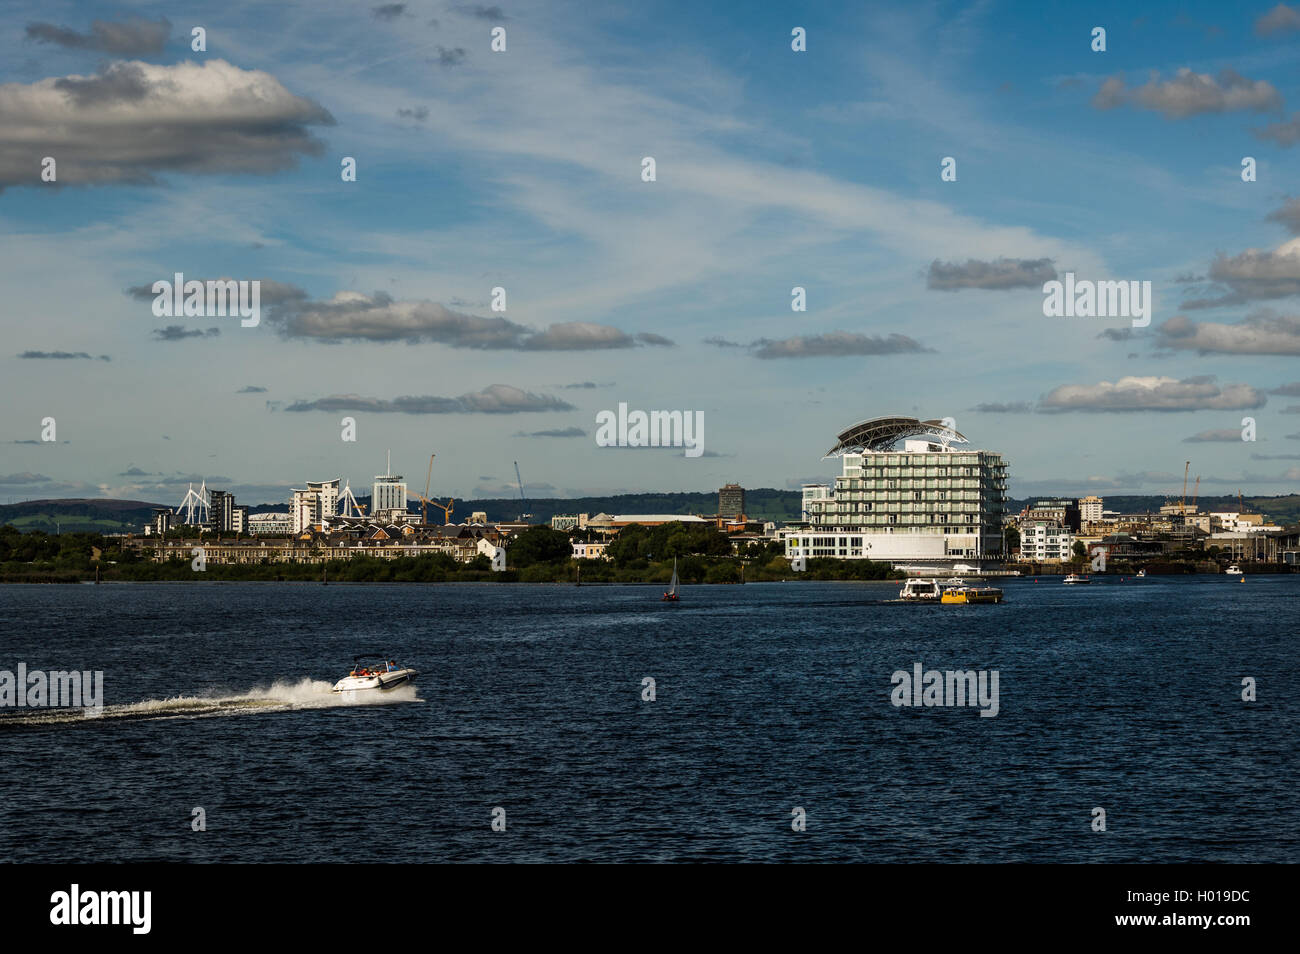 A wide shot of Cardiff Bay from the barrage showing St. Davids Hotel as well as a speeding boat sailing on the water Stock Photo